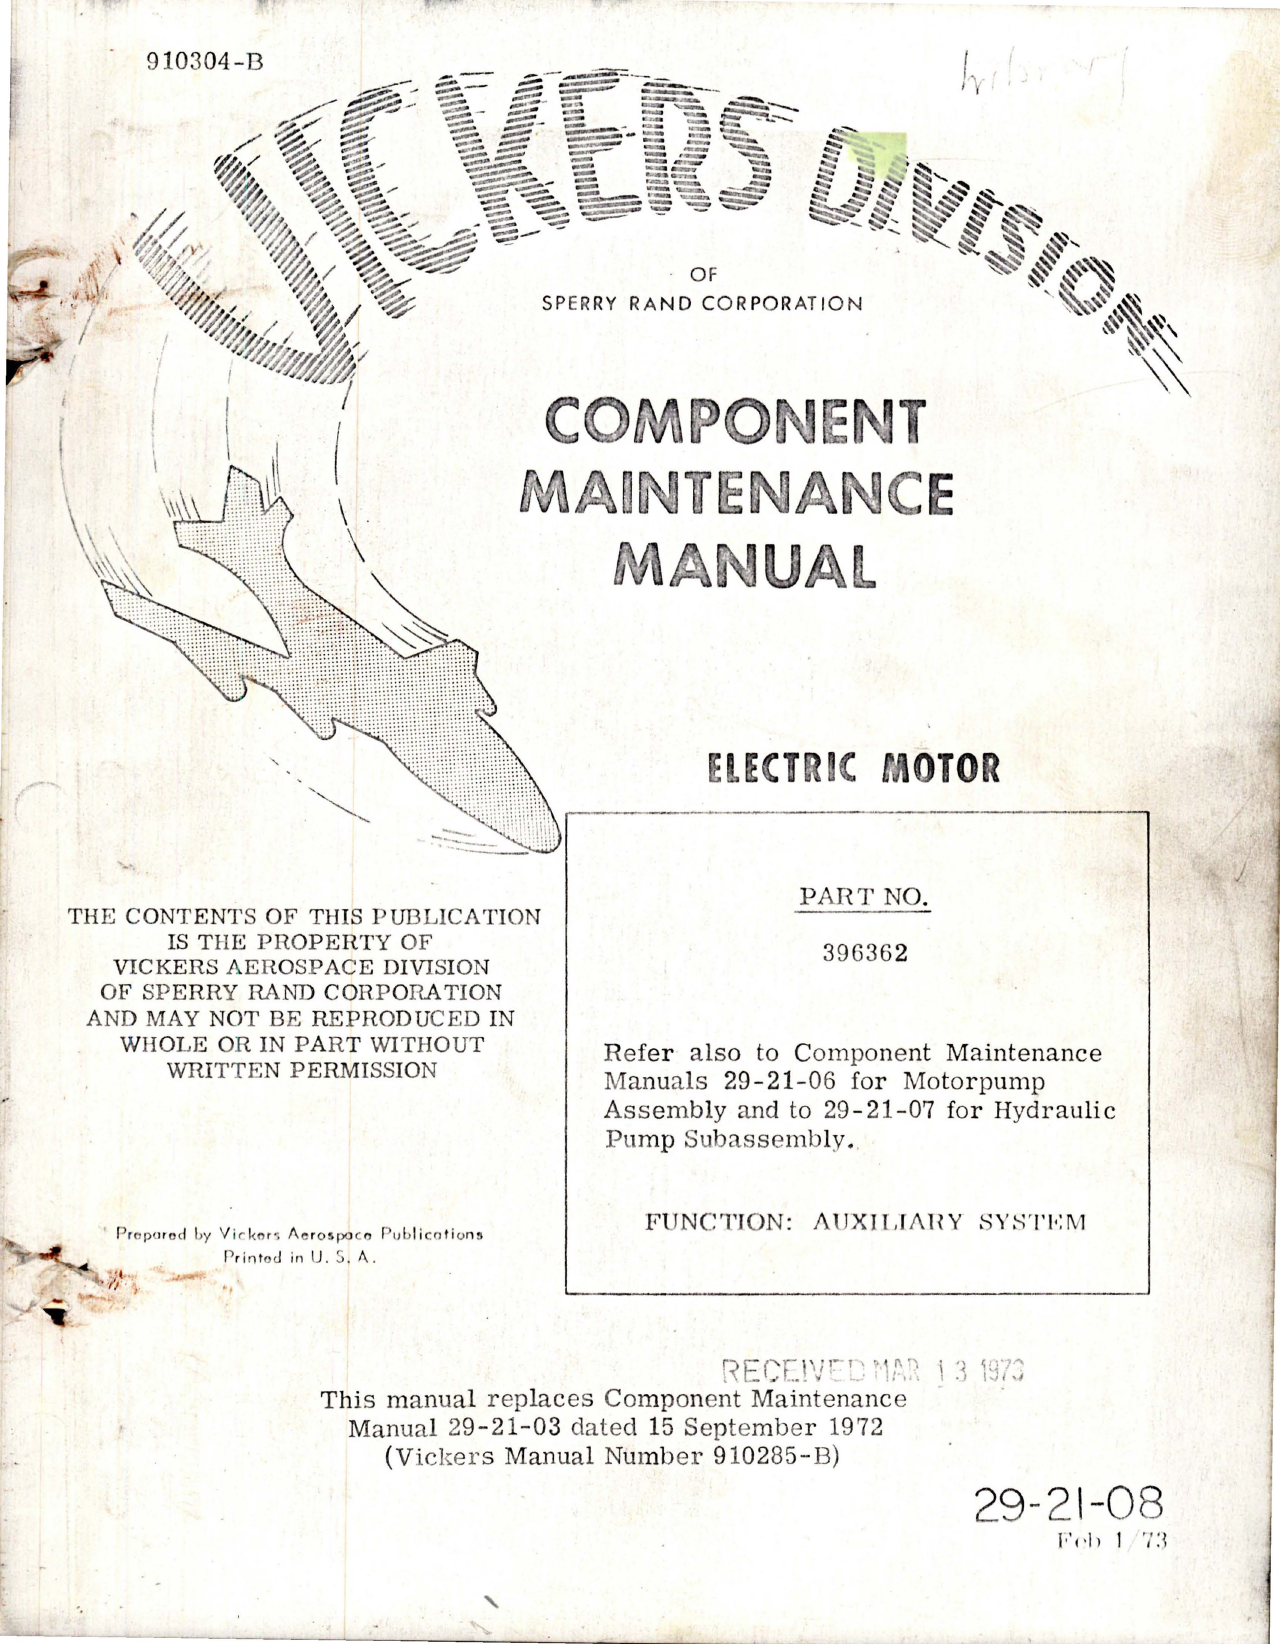 Sample page 1 from AirCorps Library document: Component Maintenance Manual for Electric Motor - Part 396362 